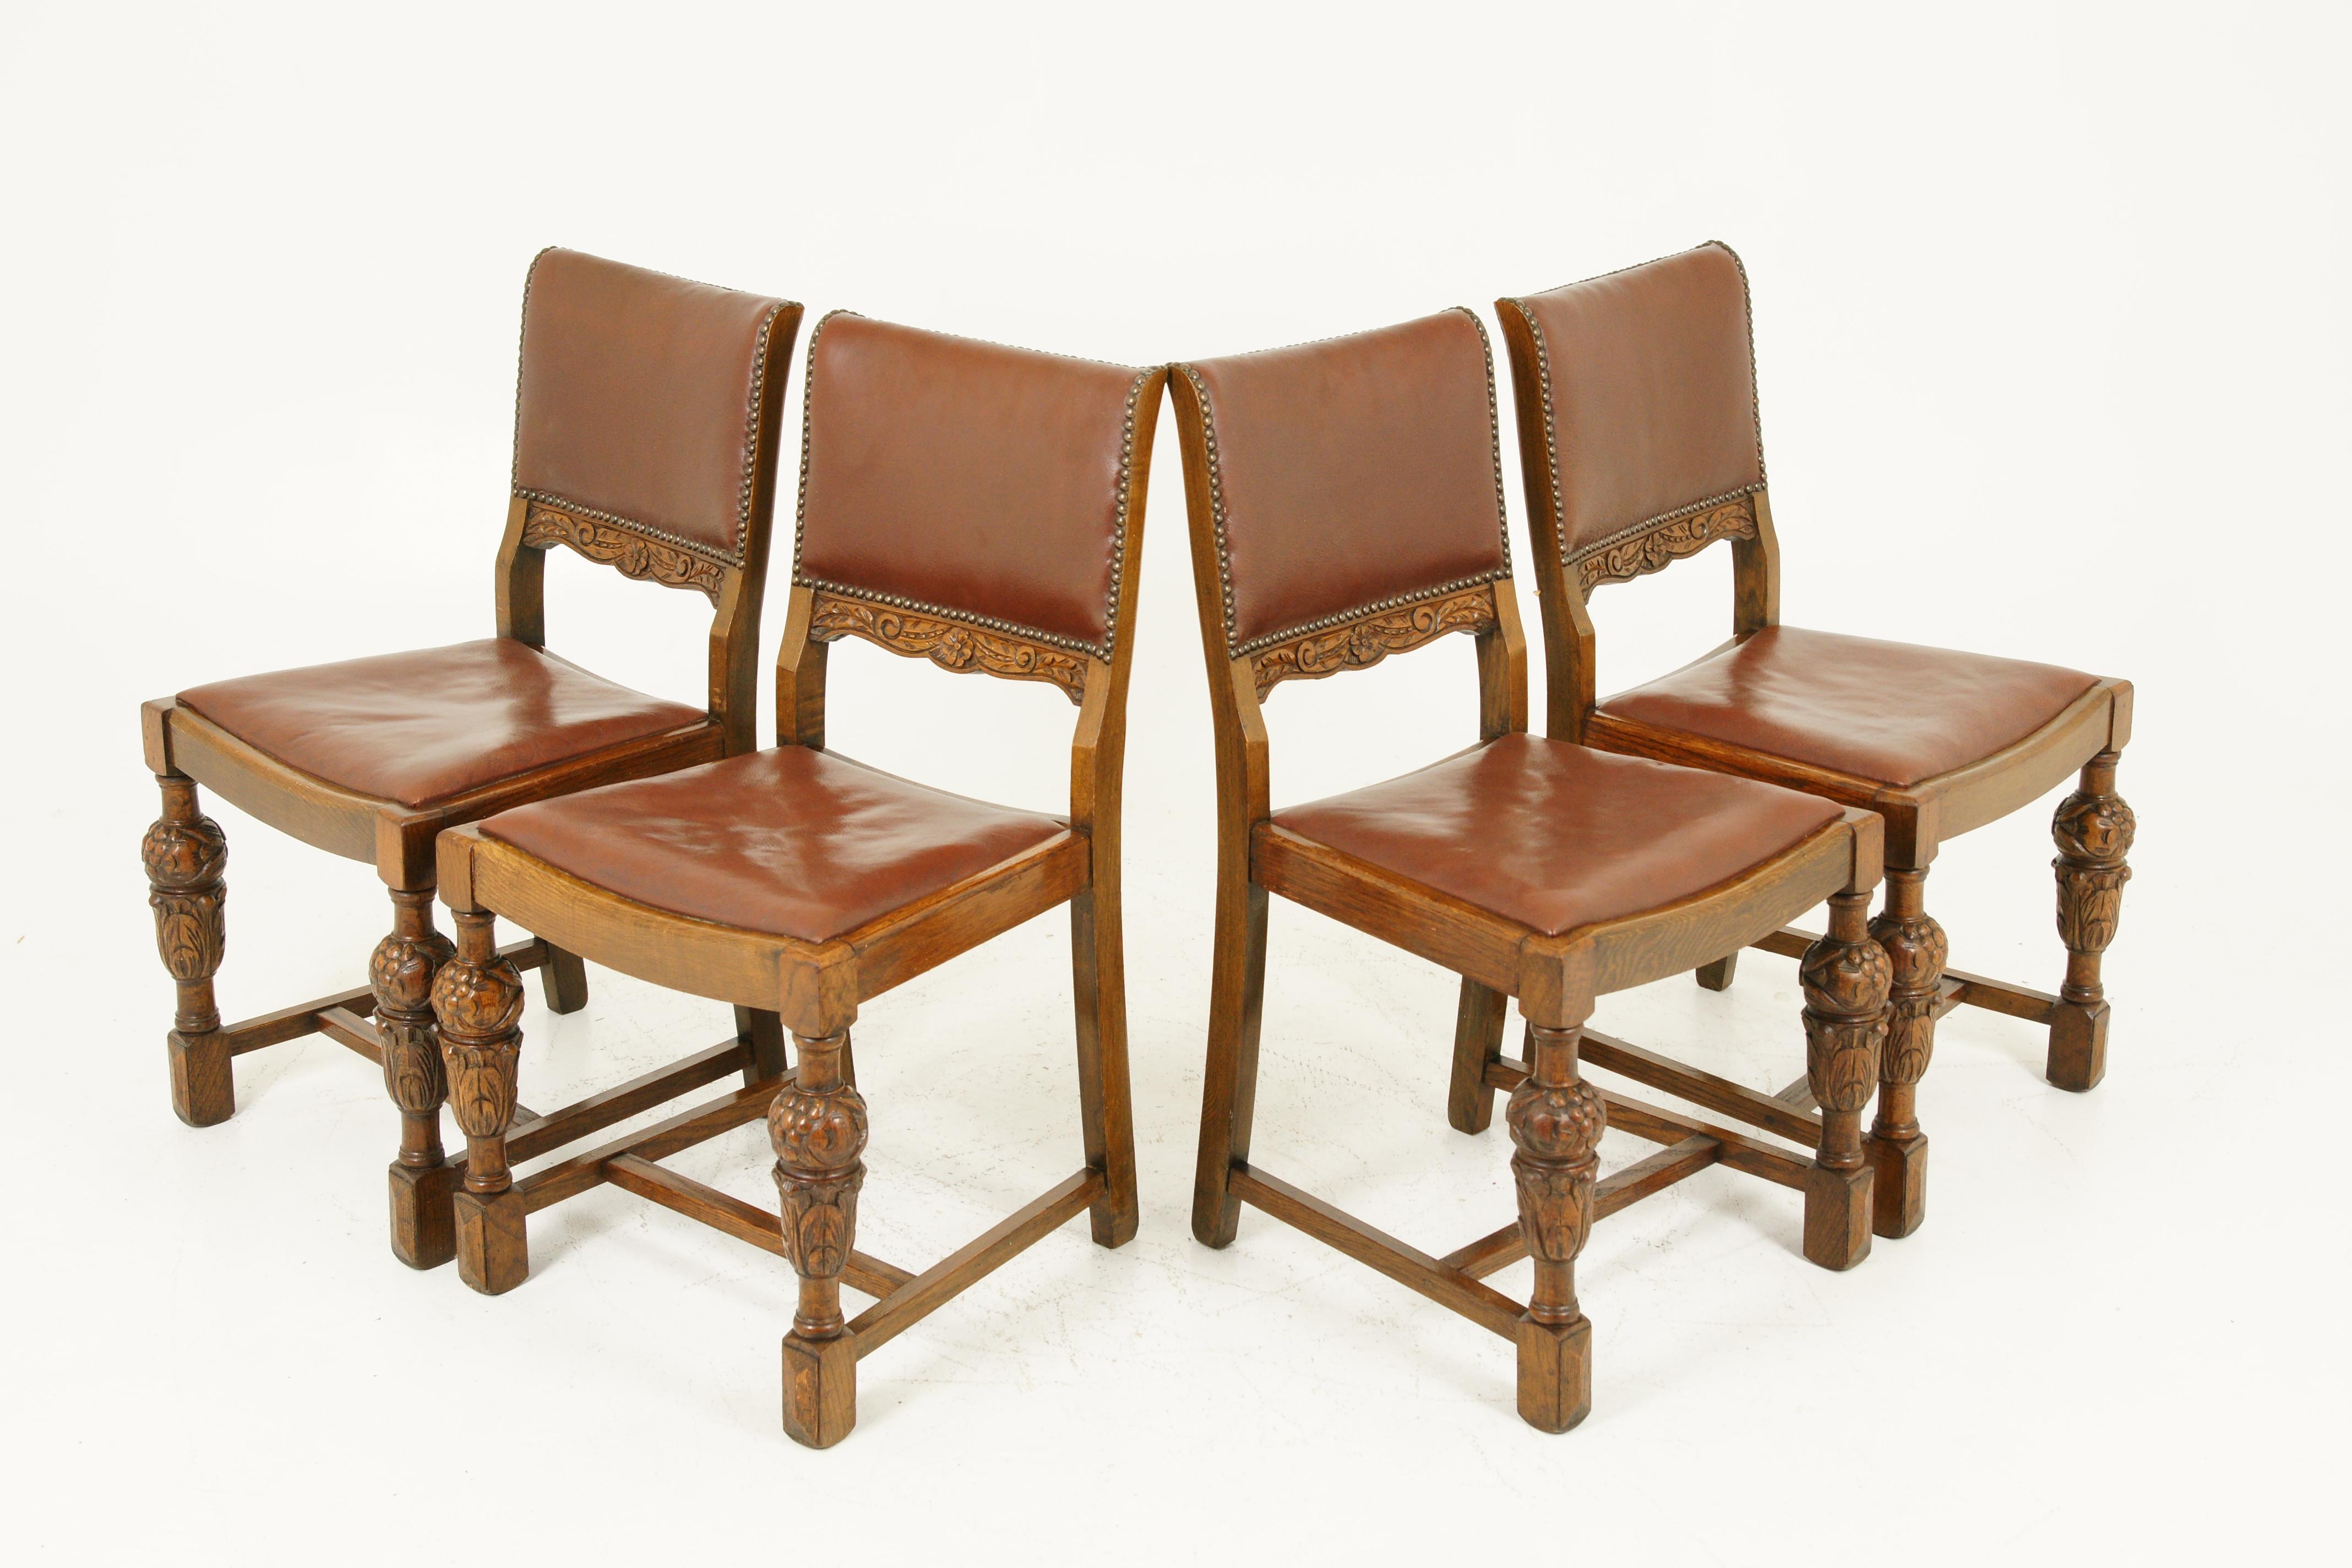 Art Deco dining chairs, bulbous legs, carved oak, Scotland 1930, Antique Furniture, B1709B

Scotland, 1930
solid oak with original finish
upholstered backs with carved center rails
lift out leather seats below
standing on carved bulbous front